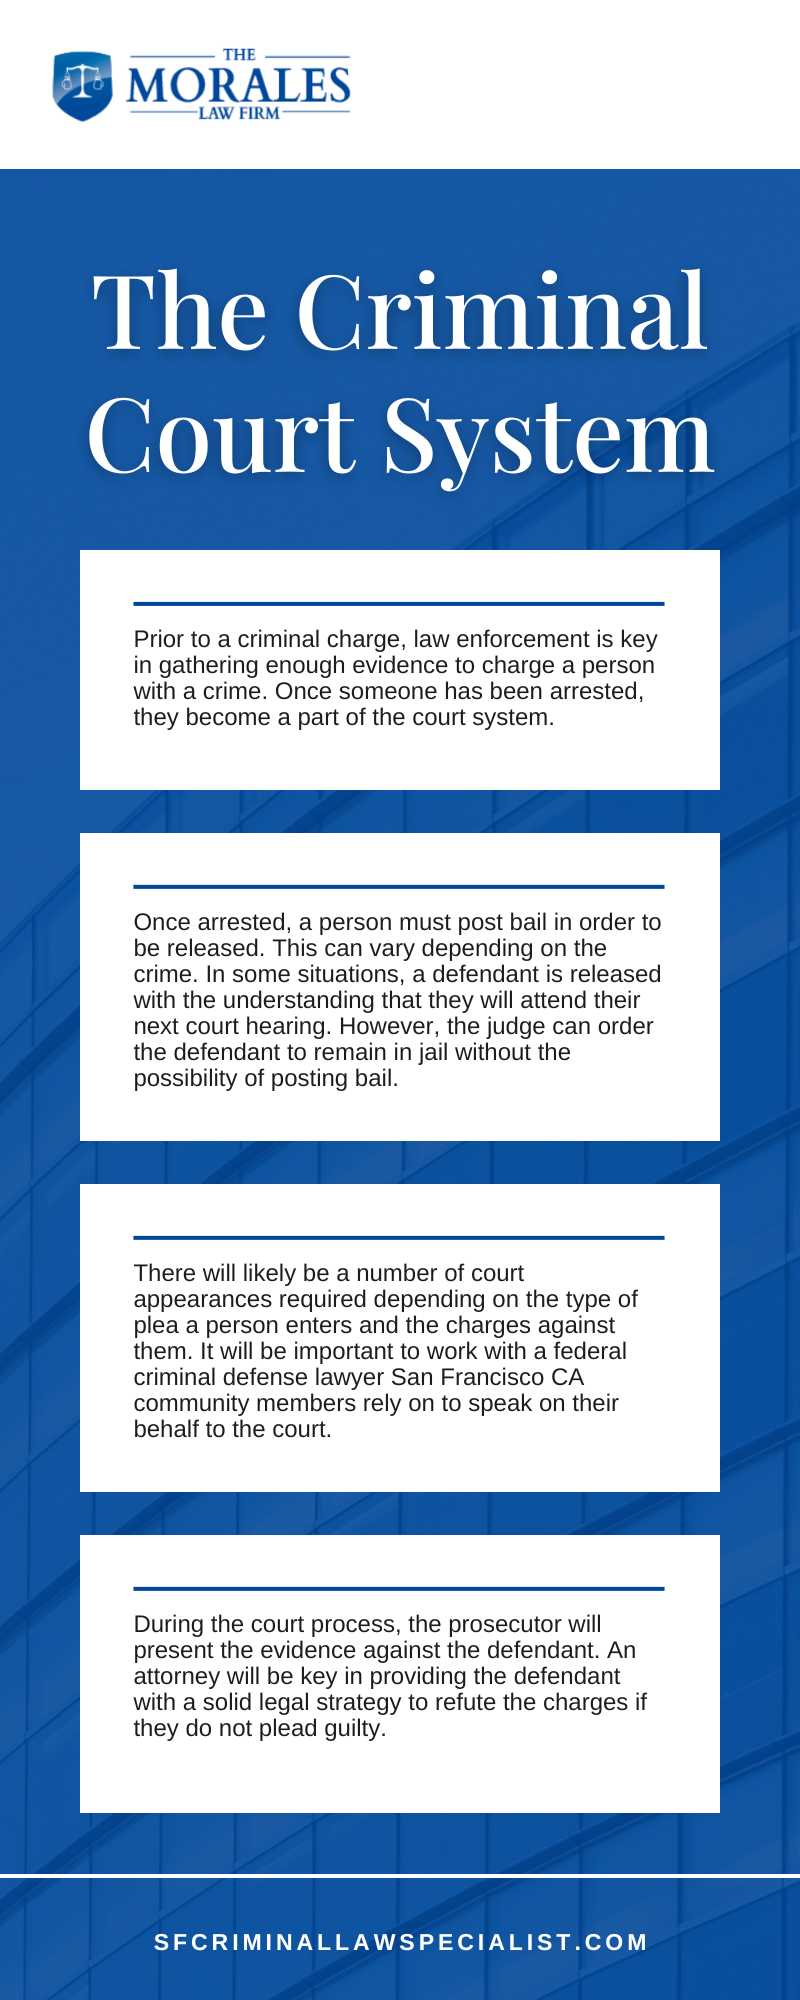 The Criminal Court System Infographic